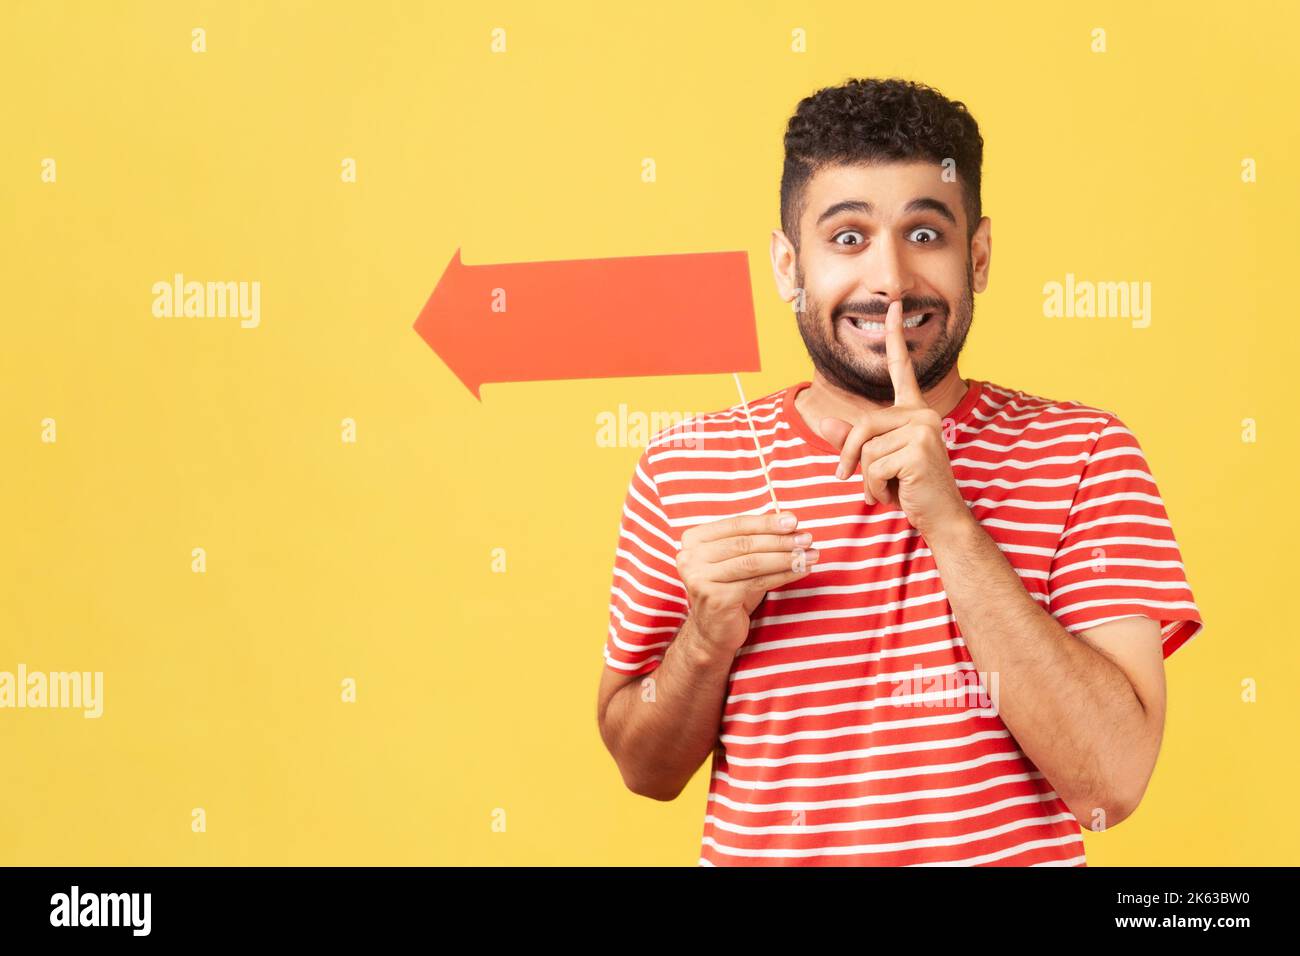 Funny man with beard in T-shirt holding arrow on stick, showing direction and shh gesture holding finger near lips, with naughty smile on face. Indoor studio shot isolated on yellow background. Stock Photo